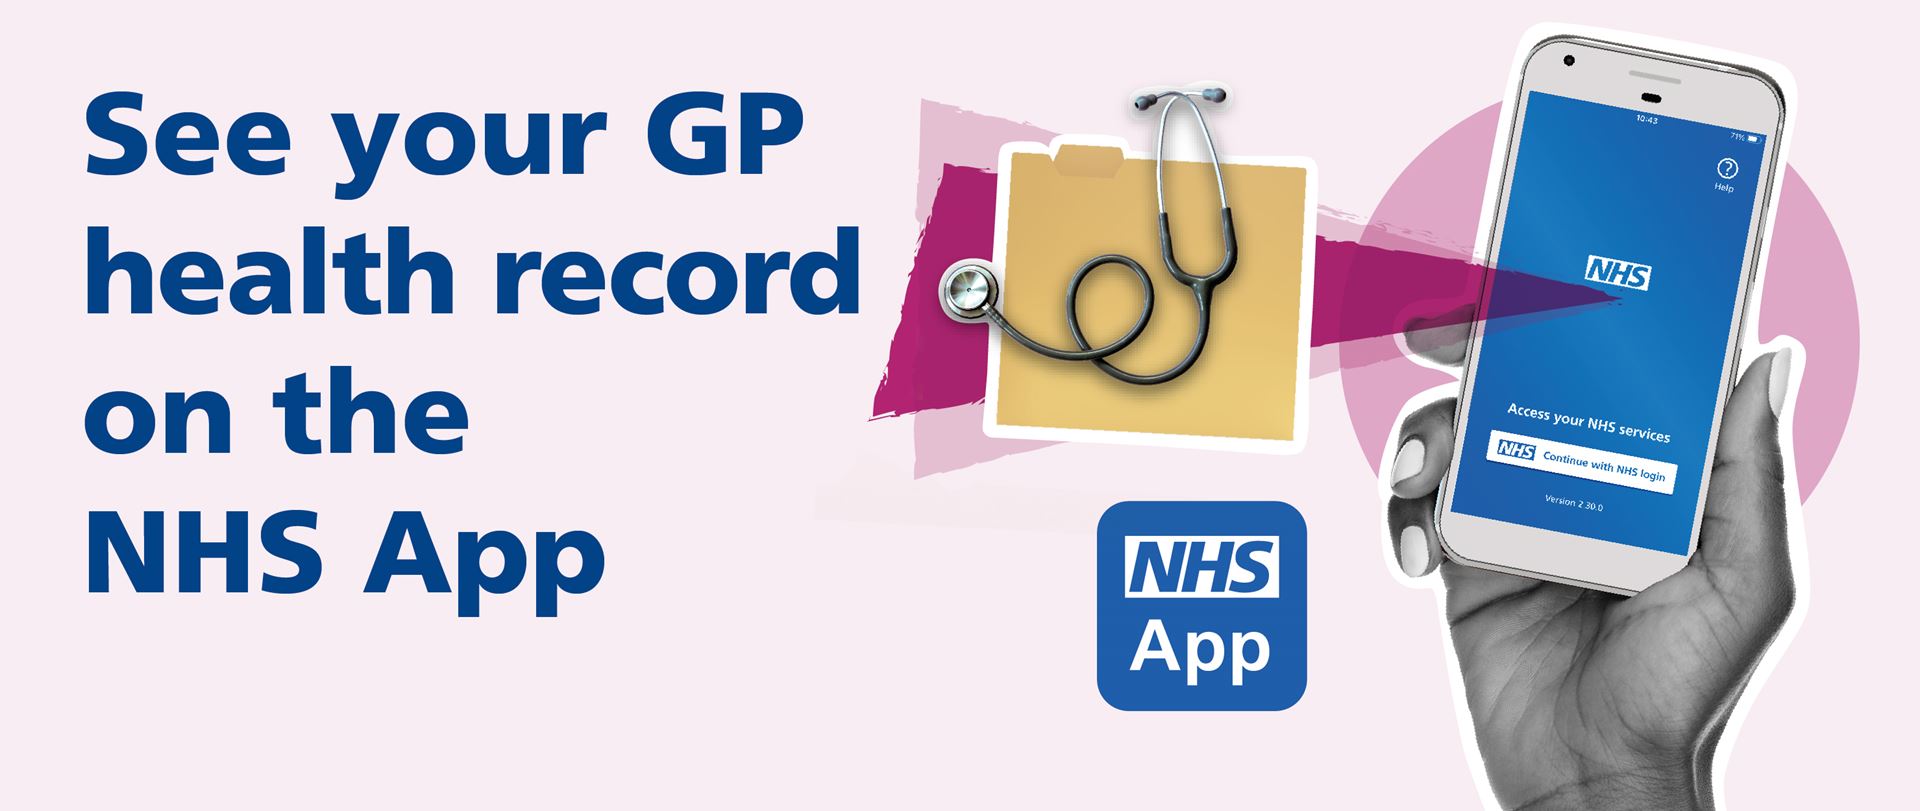 See your GP health record on the NHS App 